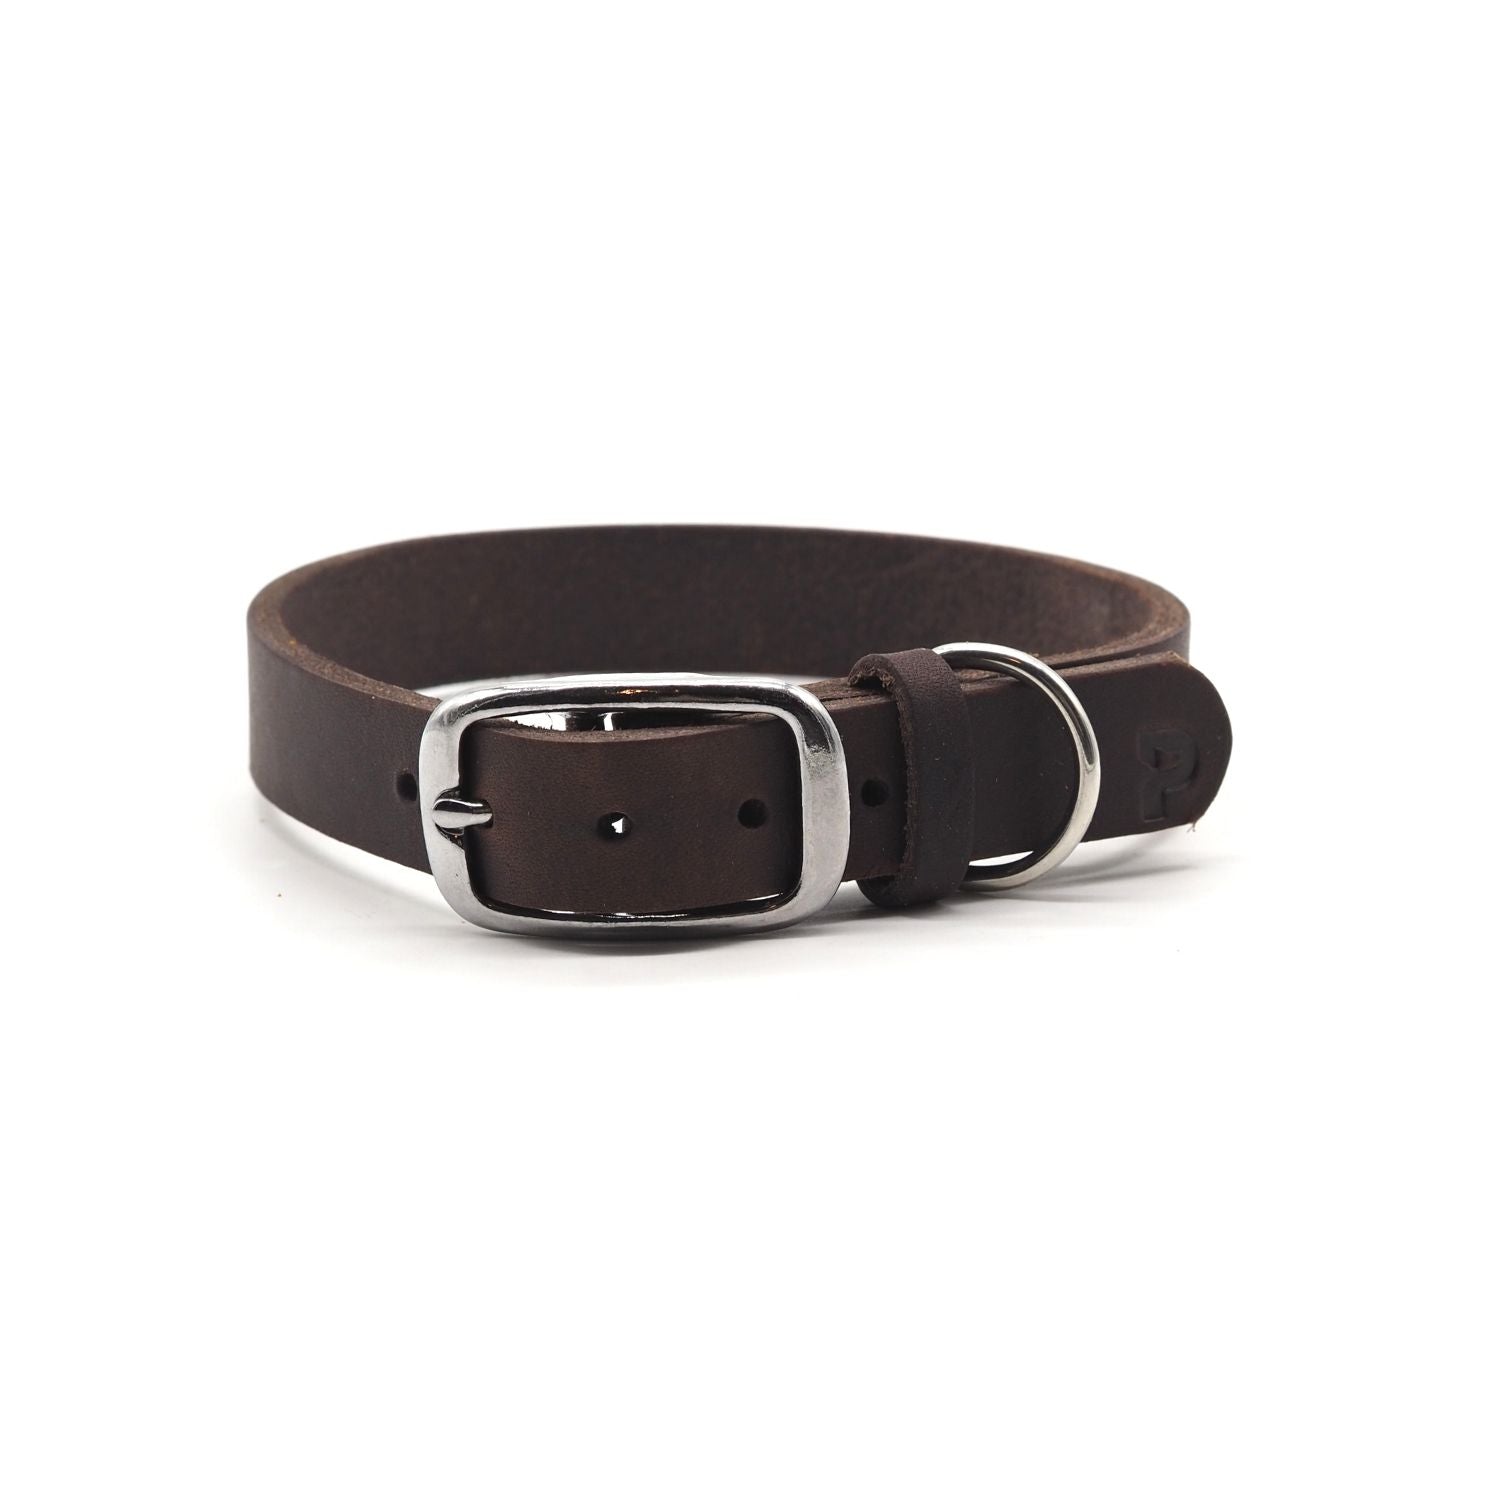 Narrow leather collar in chestnut